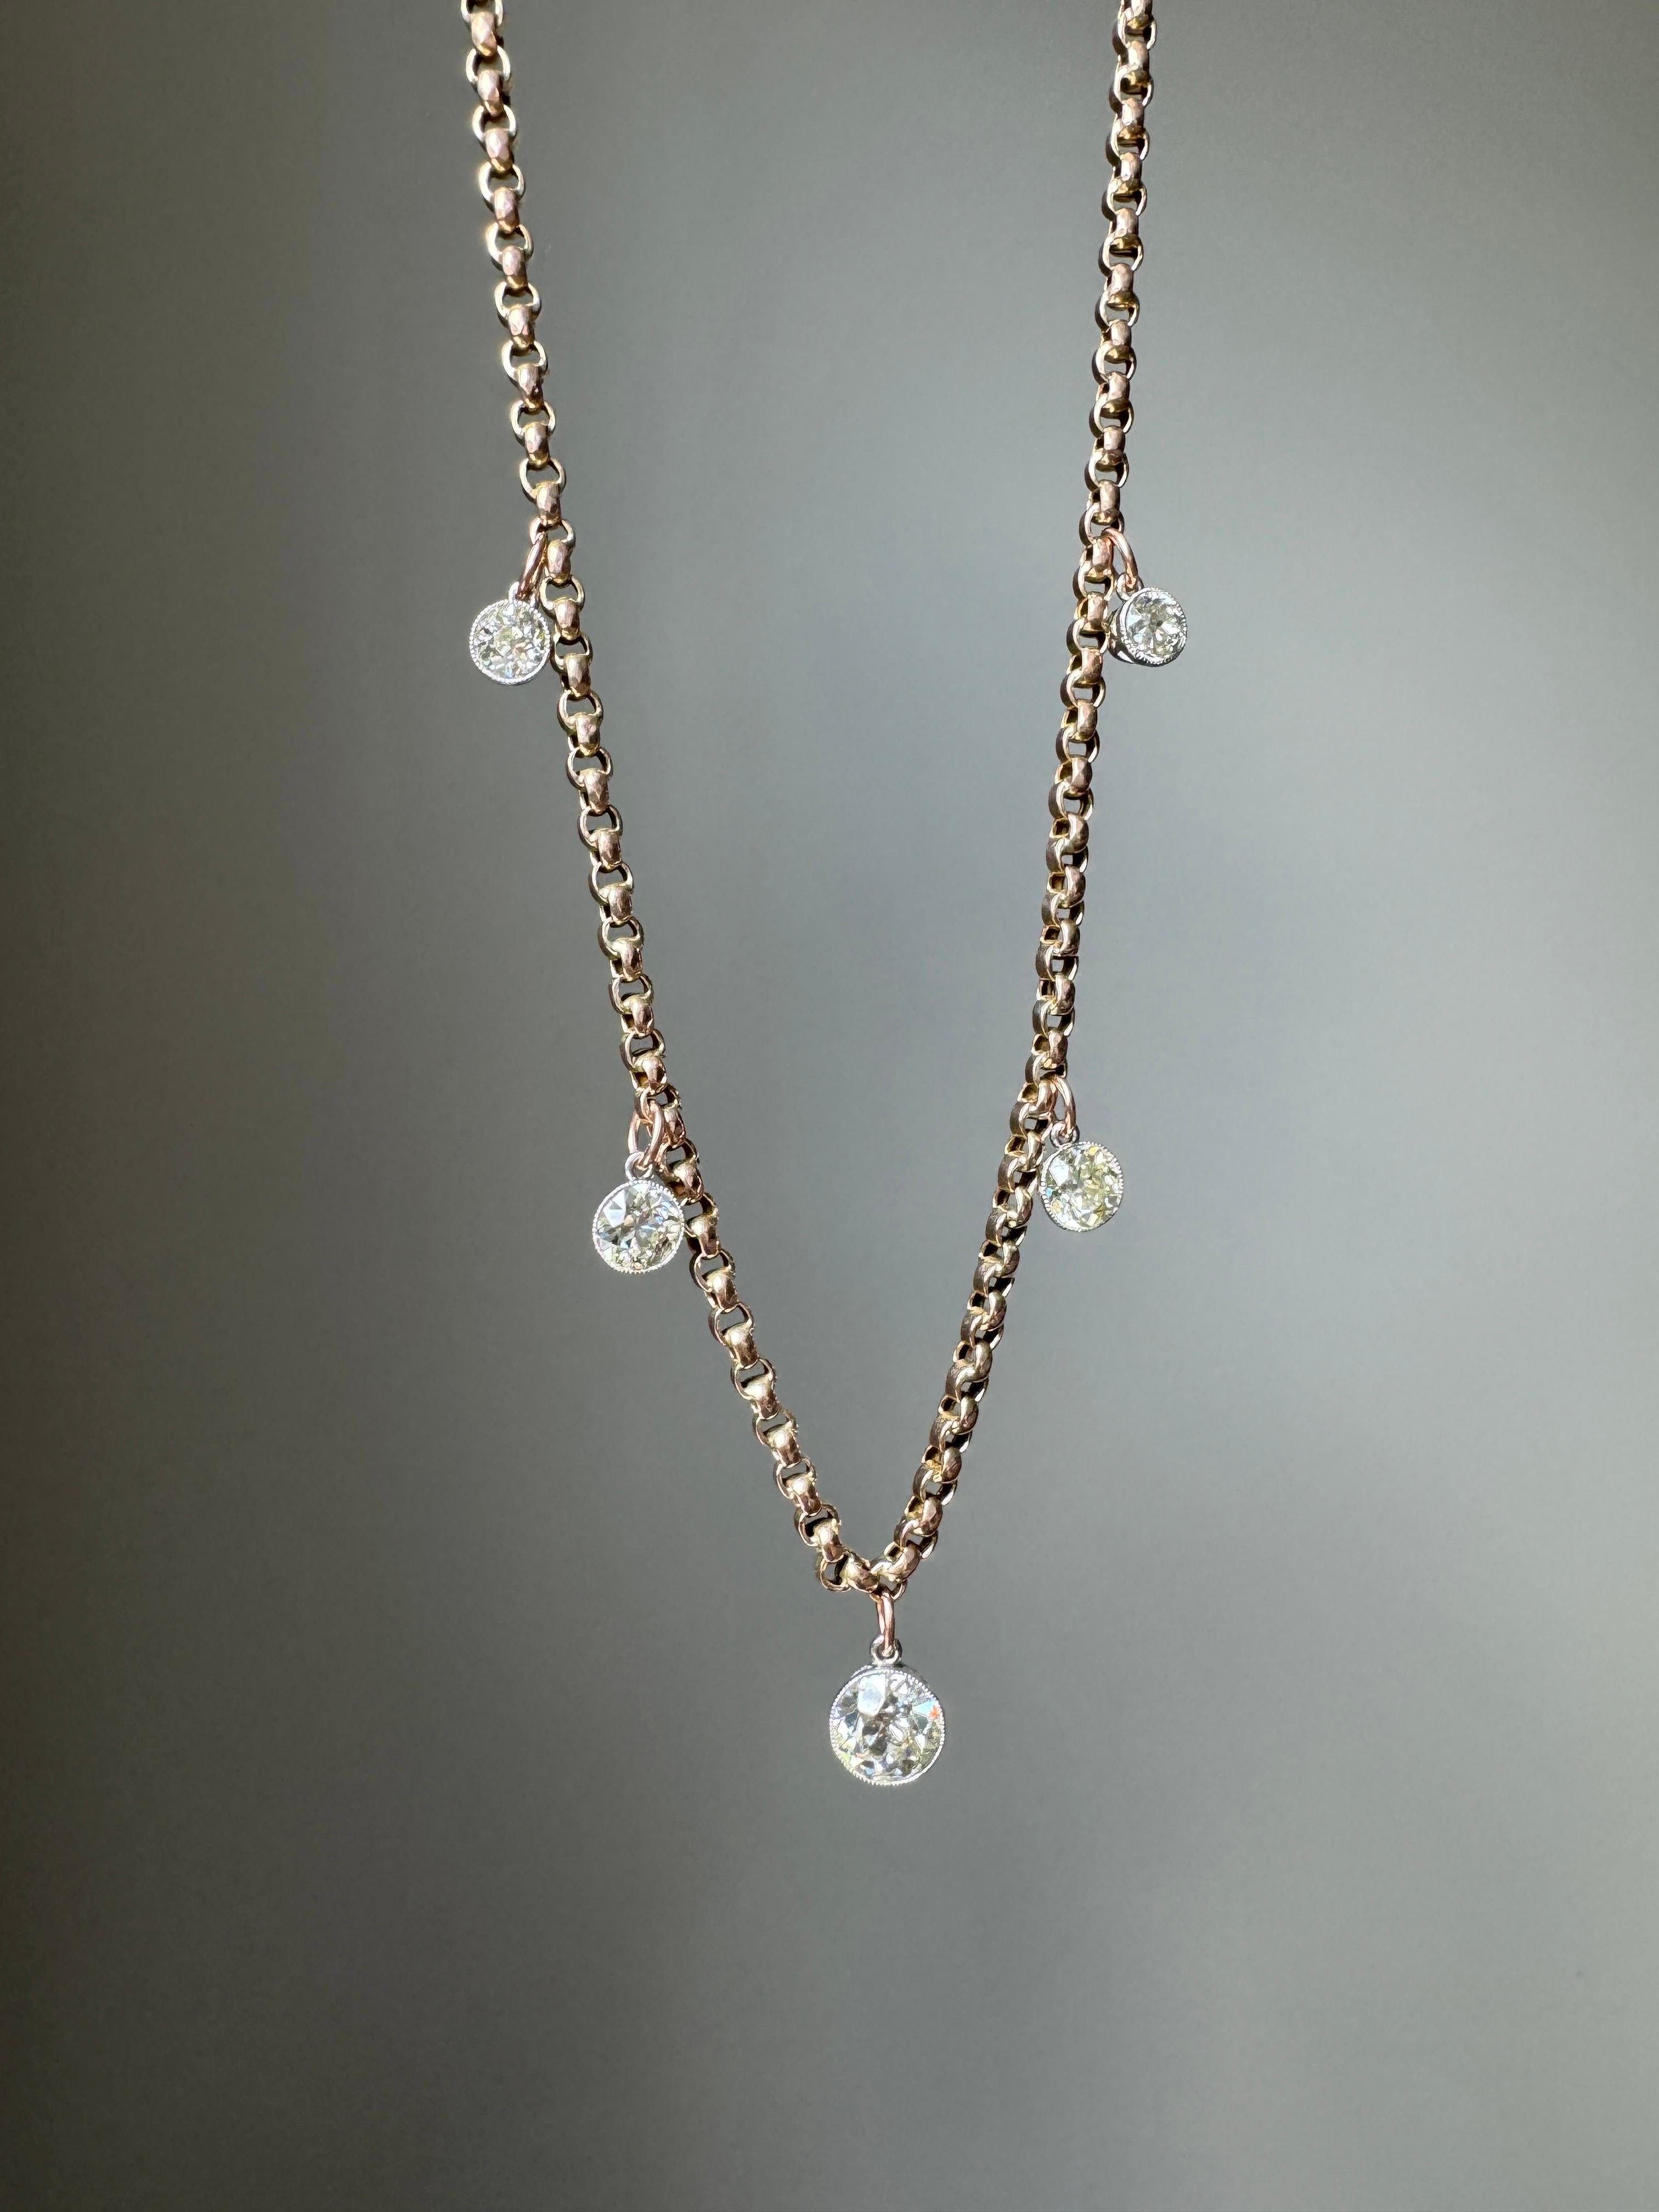 Bespoke Diamond Conversion Station Necklace 4.37 Carats In Excellent Condition For Sale In Hummelstown, PA